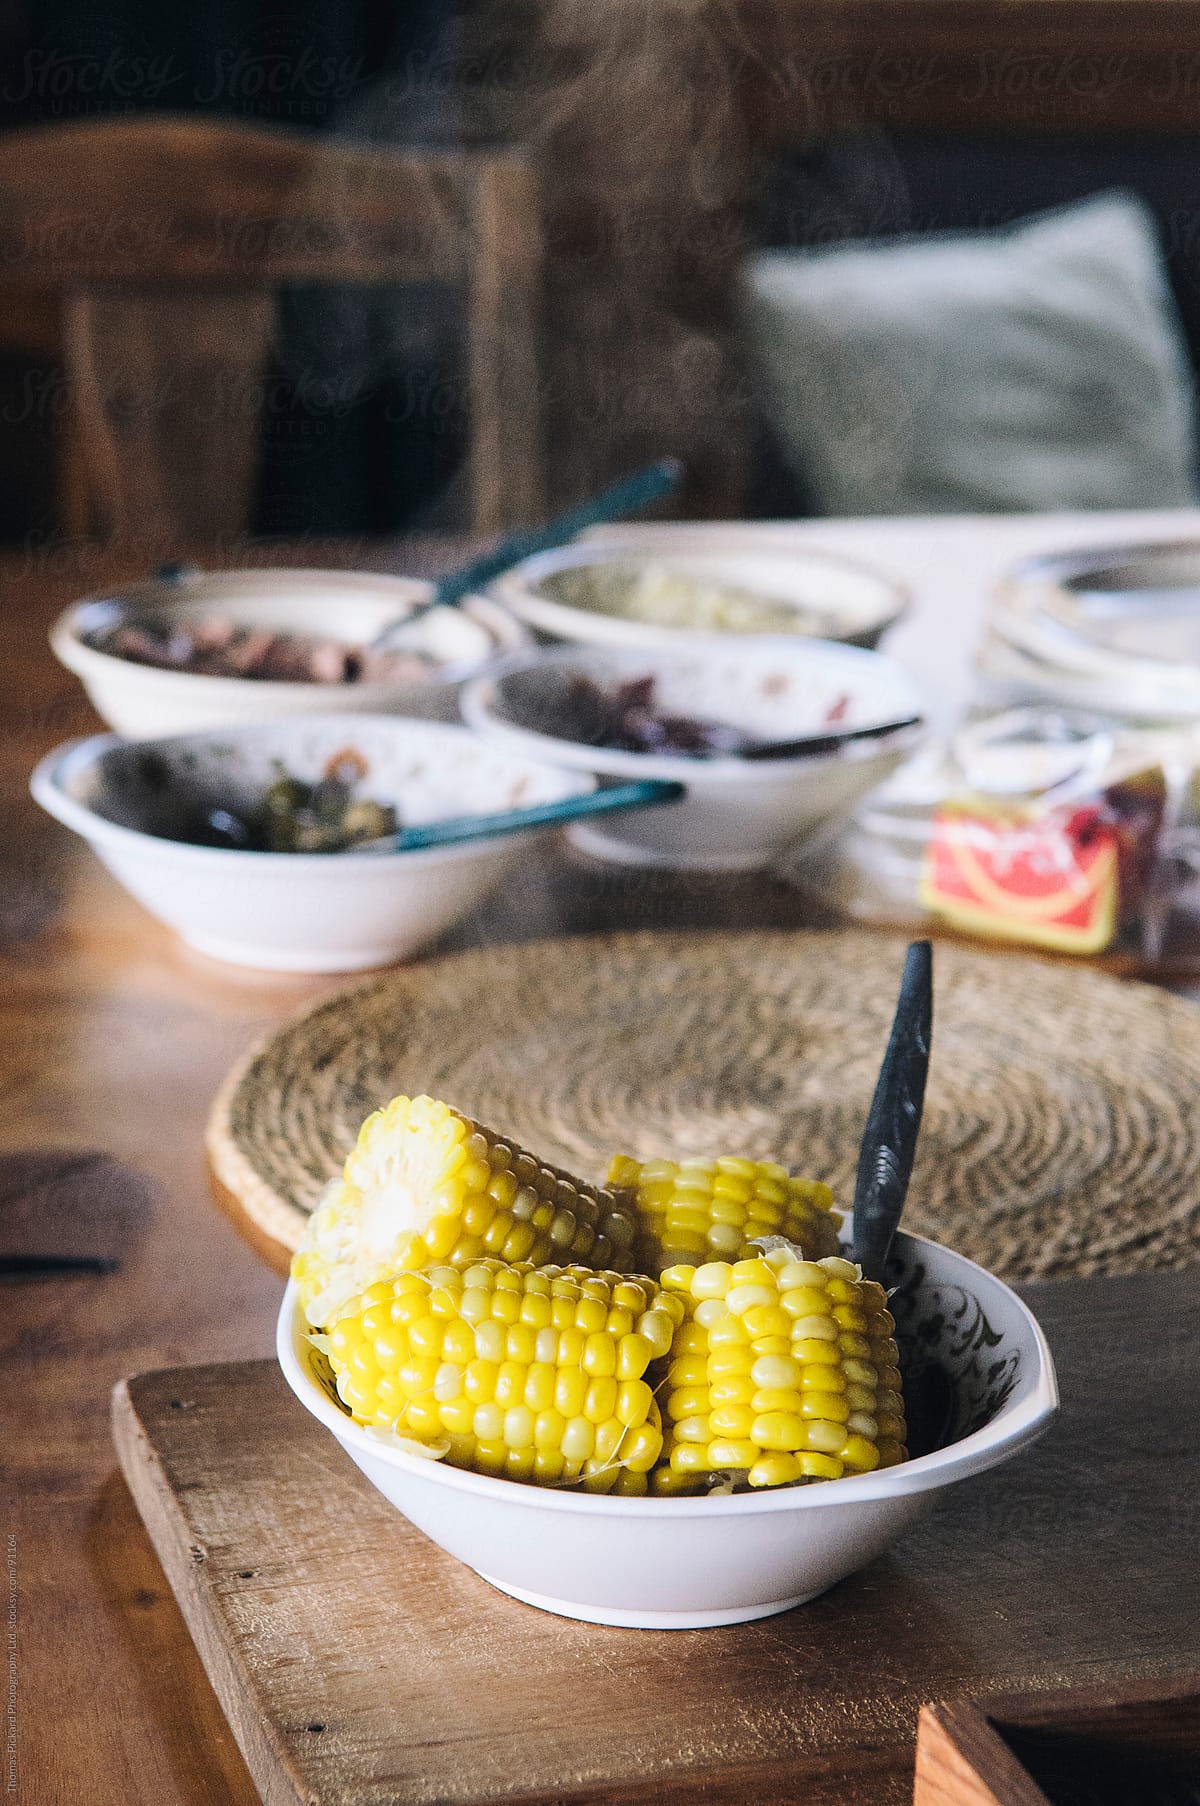 A bowl of steaming corn on the cob, New Zealand.